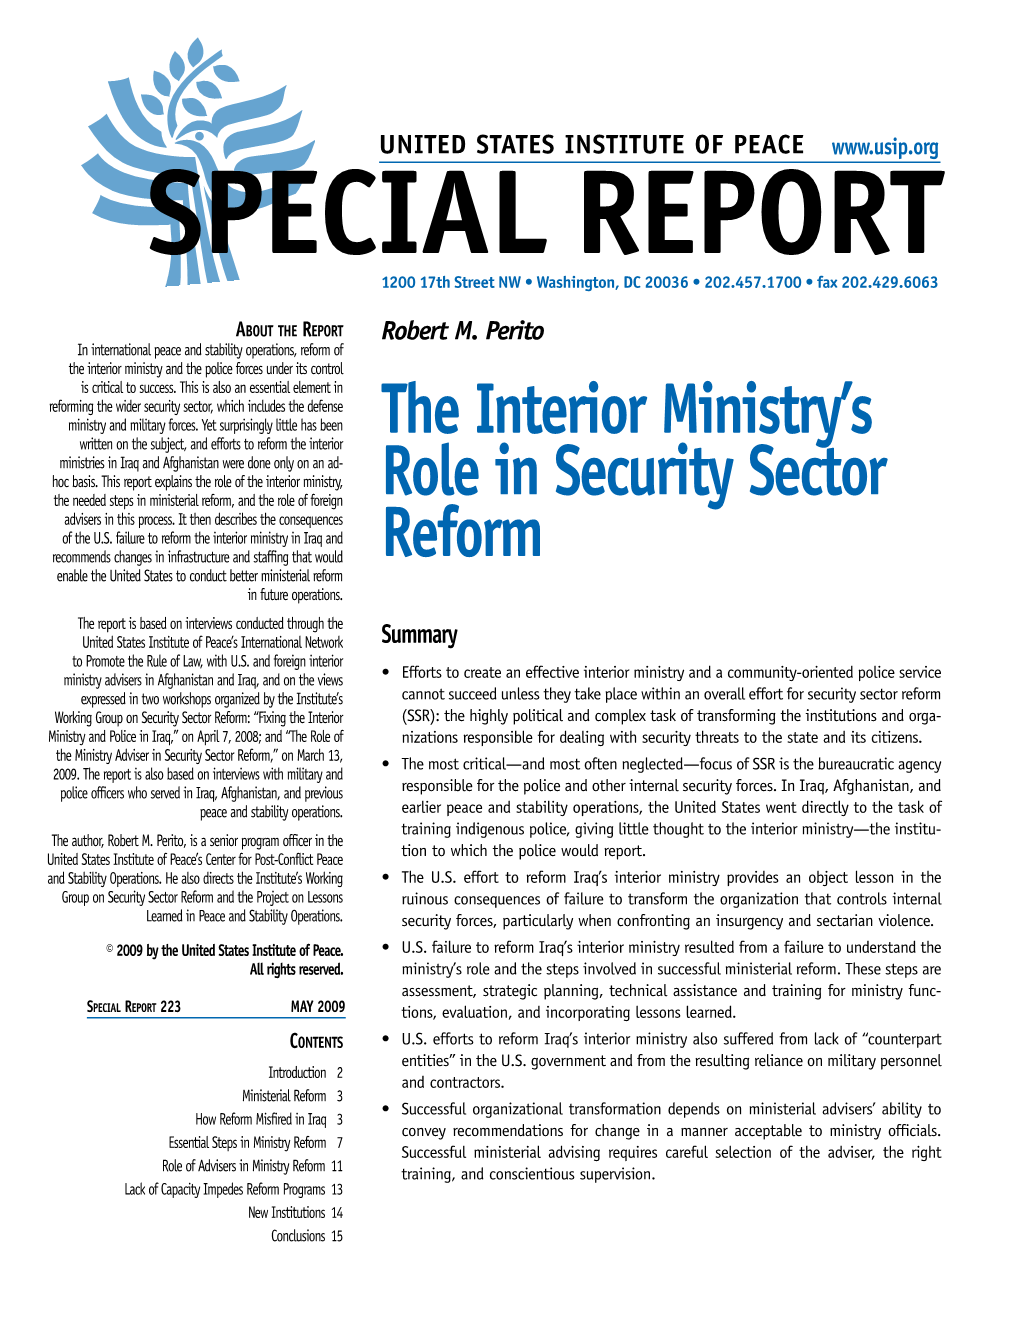 The Interior Ministry's Role in Security